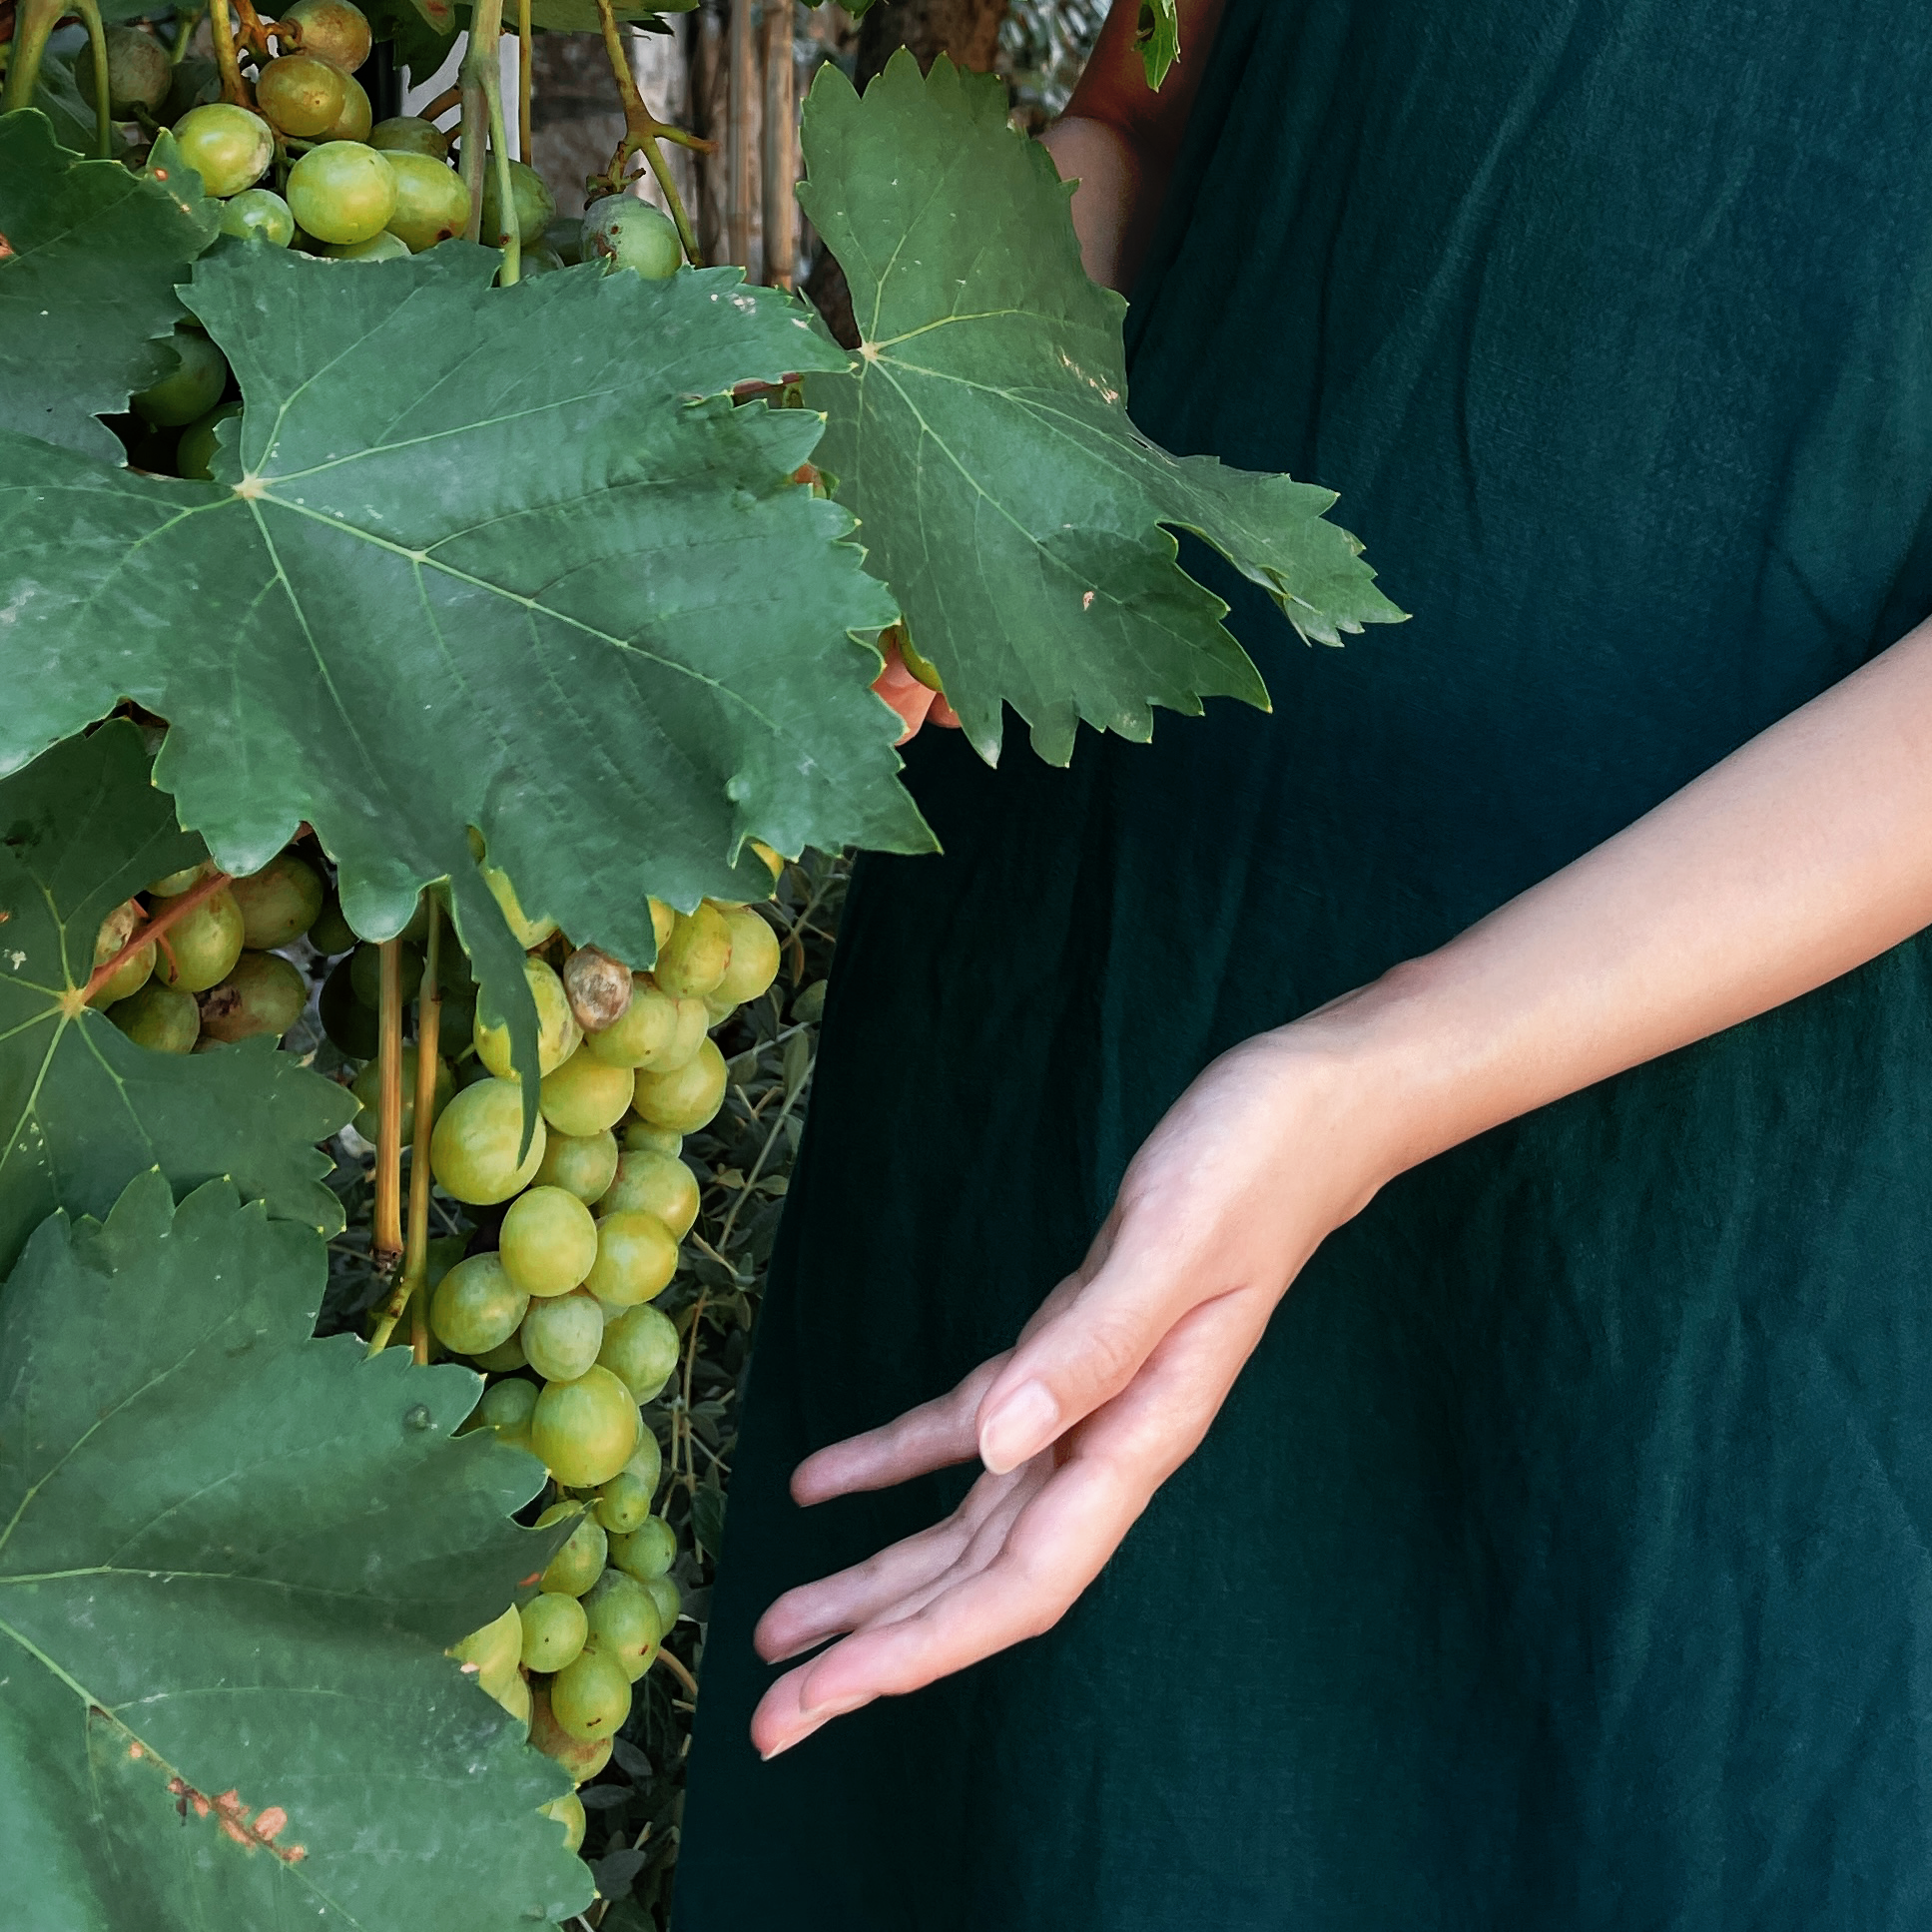 grapes positioned next to a hand, with a green dress in the background